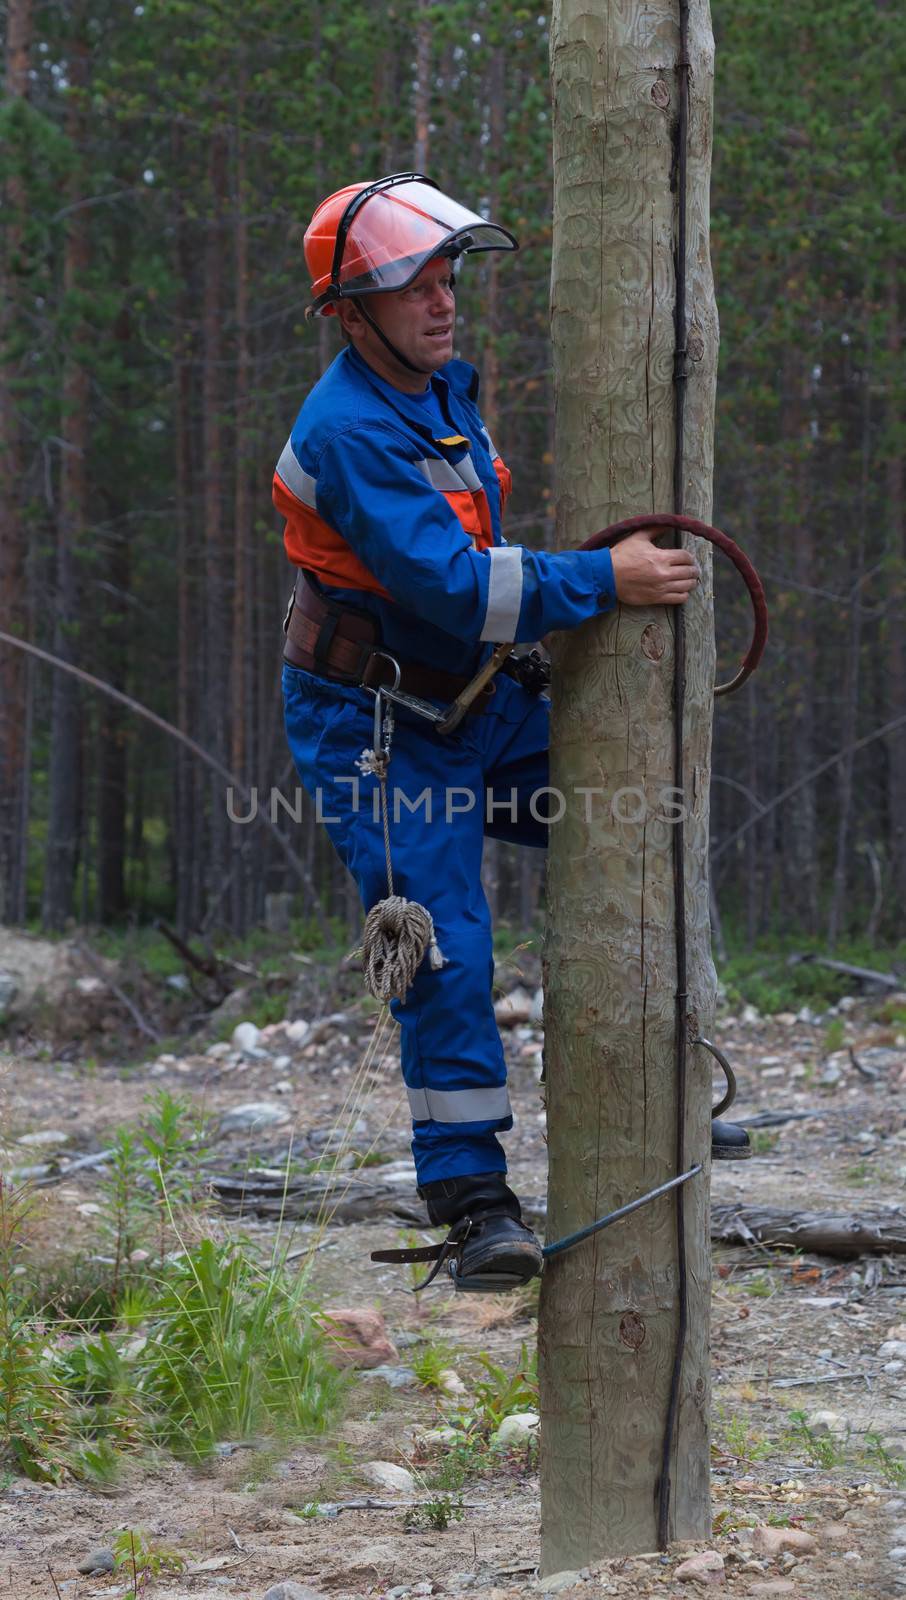 Electrician begins to climb on a power pole by AleksandrN